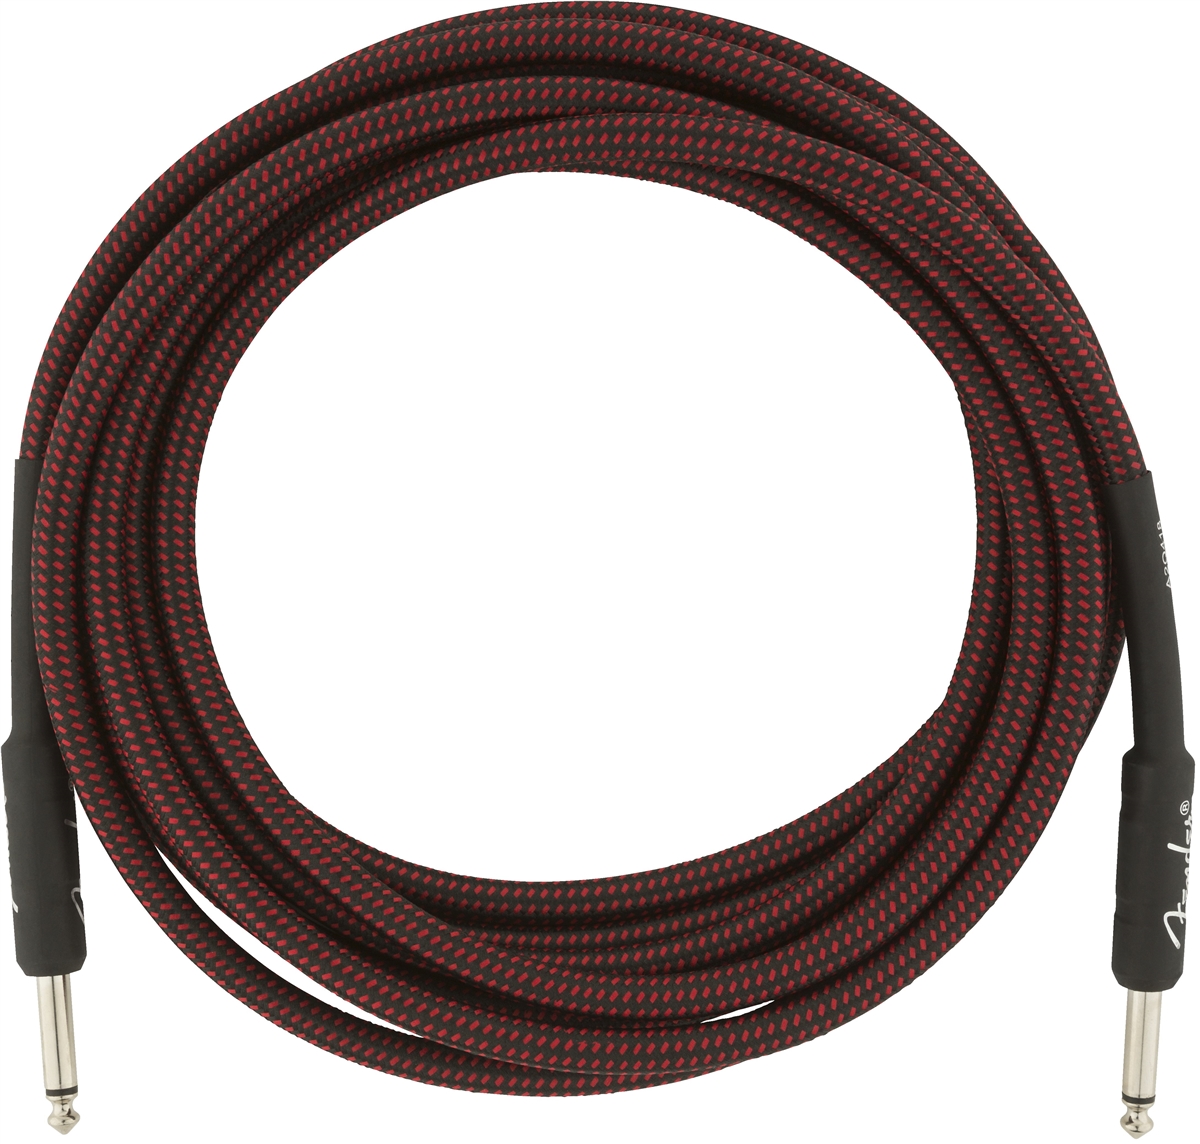 Fender Professional Series Instrument Cable 15 FT, Red Tweed